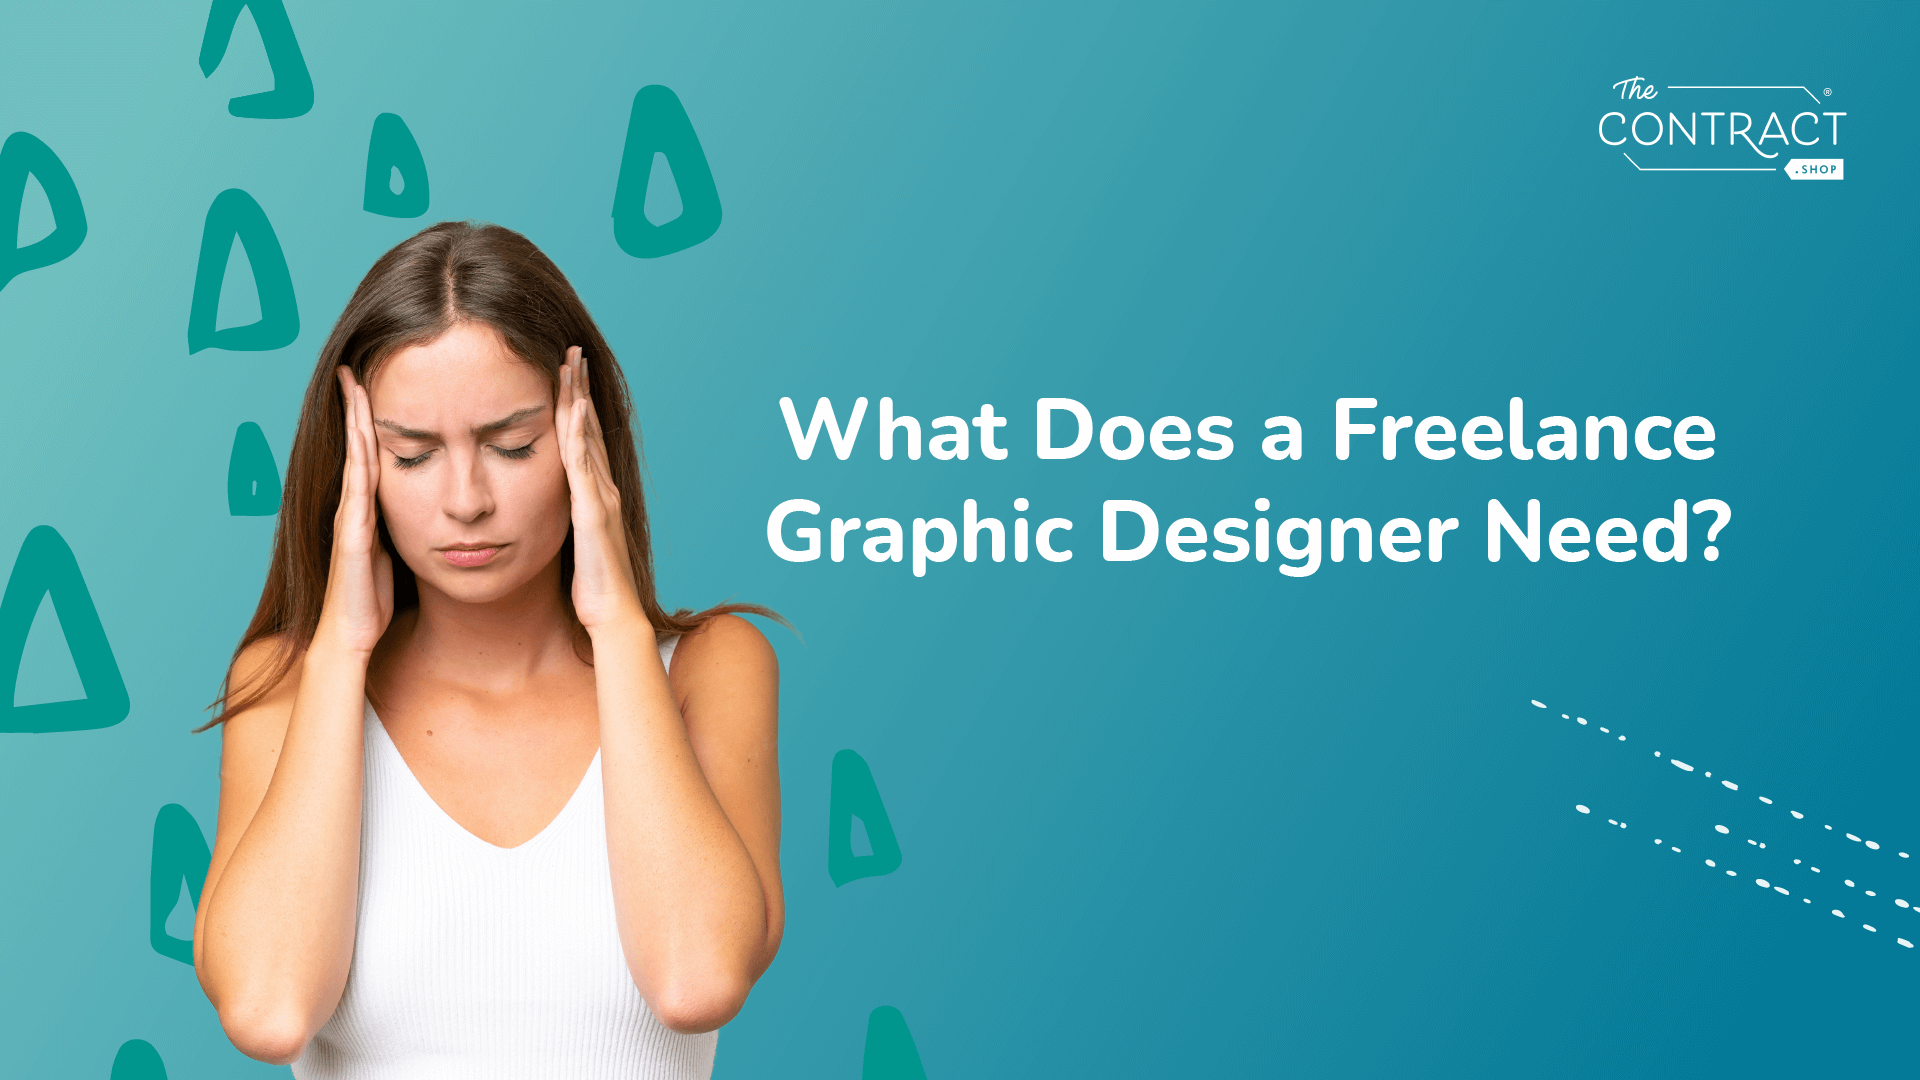 What Does a Freelance Graphic Designer Need?